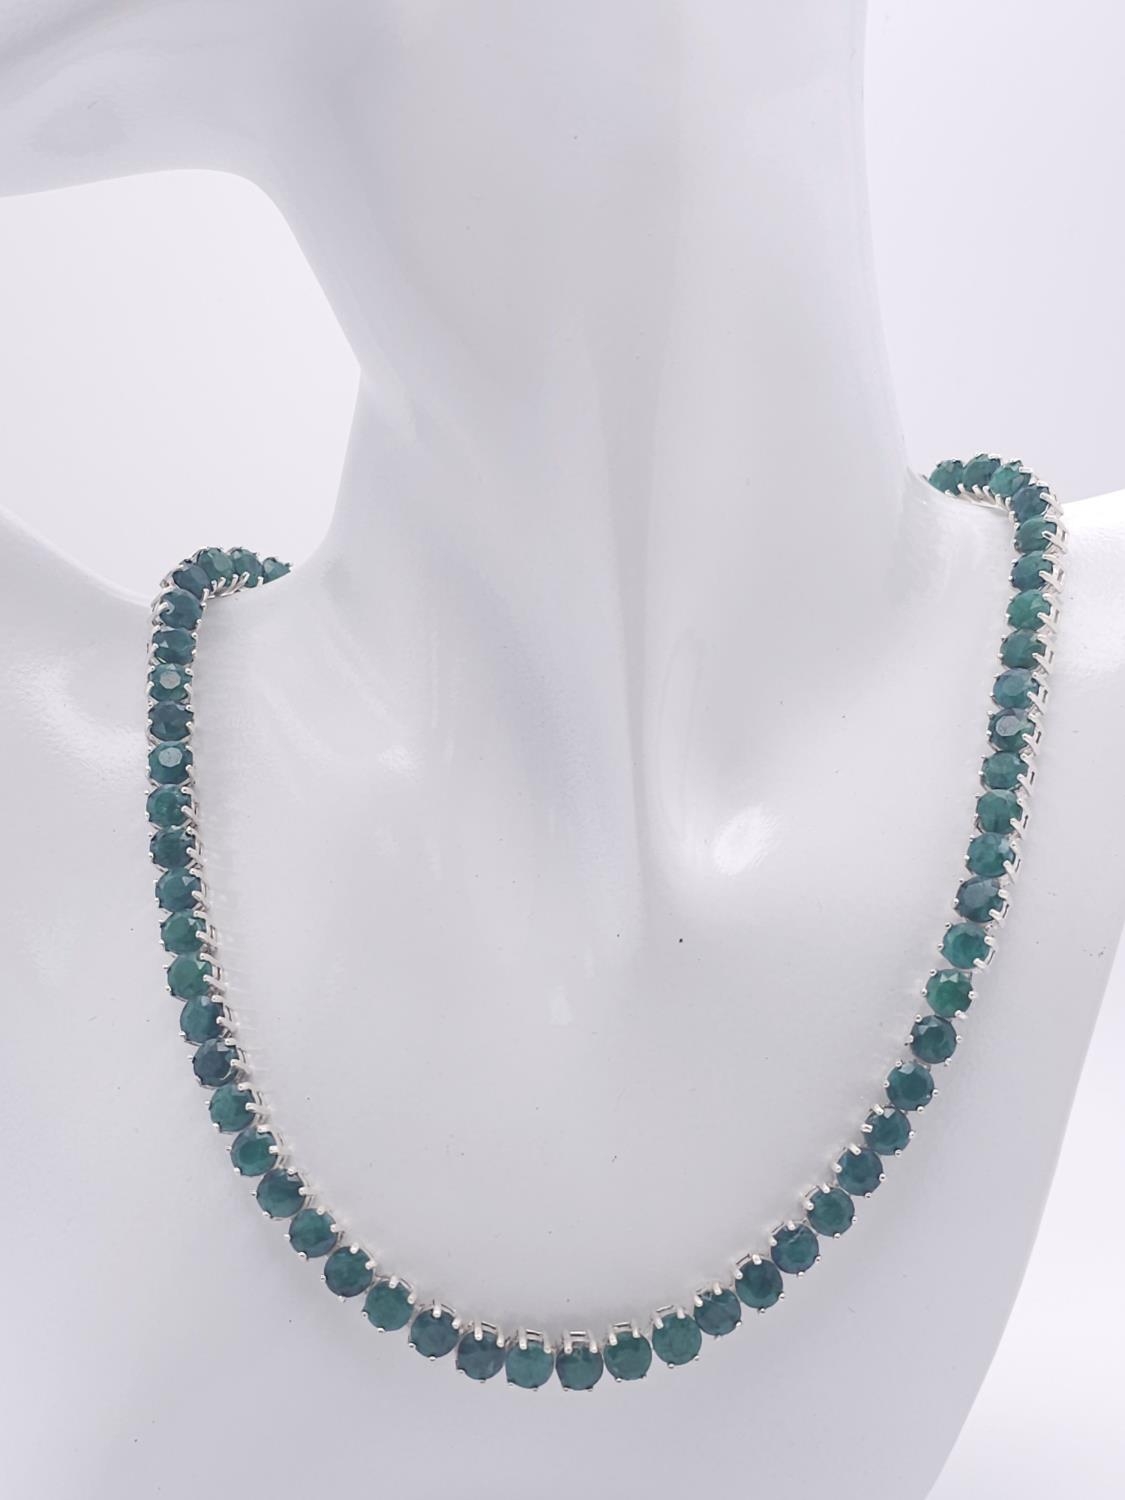 A 95ctw Emerald Gemstone Rondelle Single Strand Necklace - with Emerald and 925 Silver clasp. - Image 2 of 7